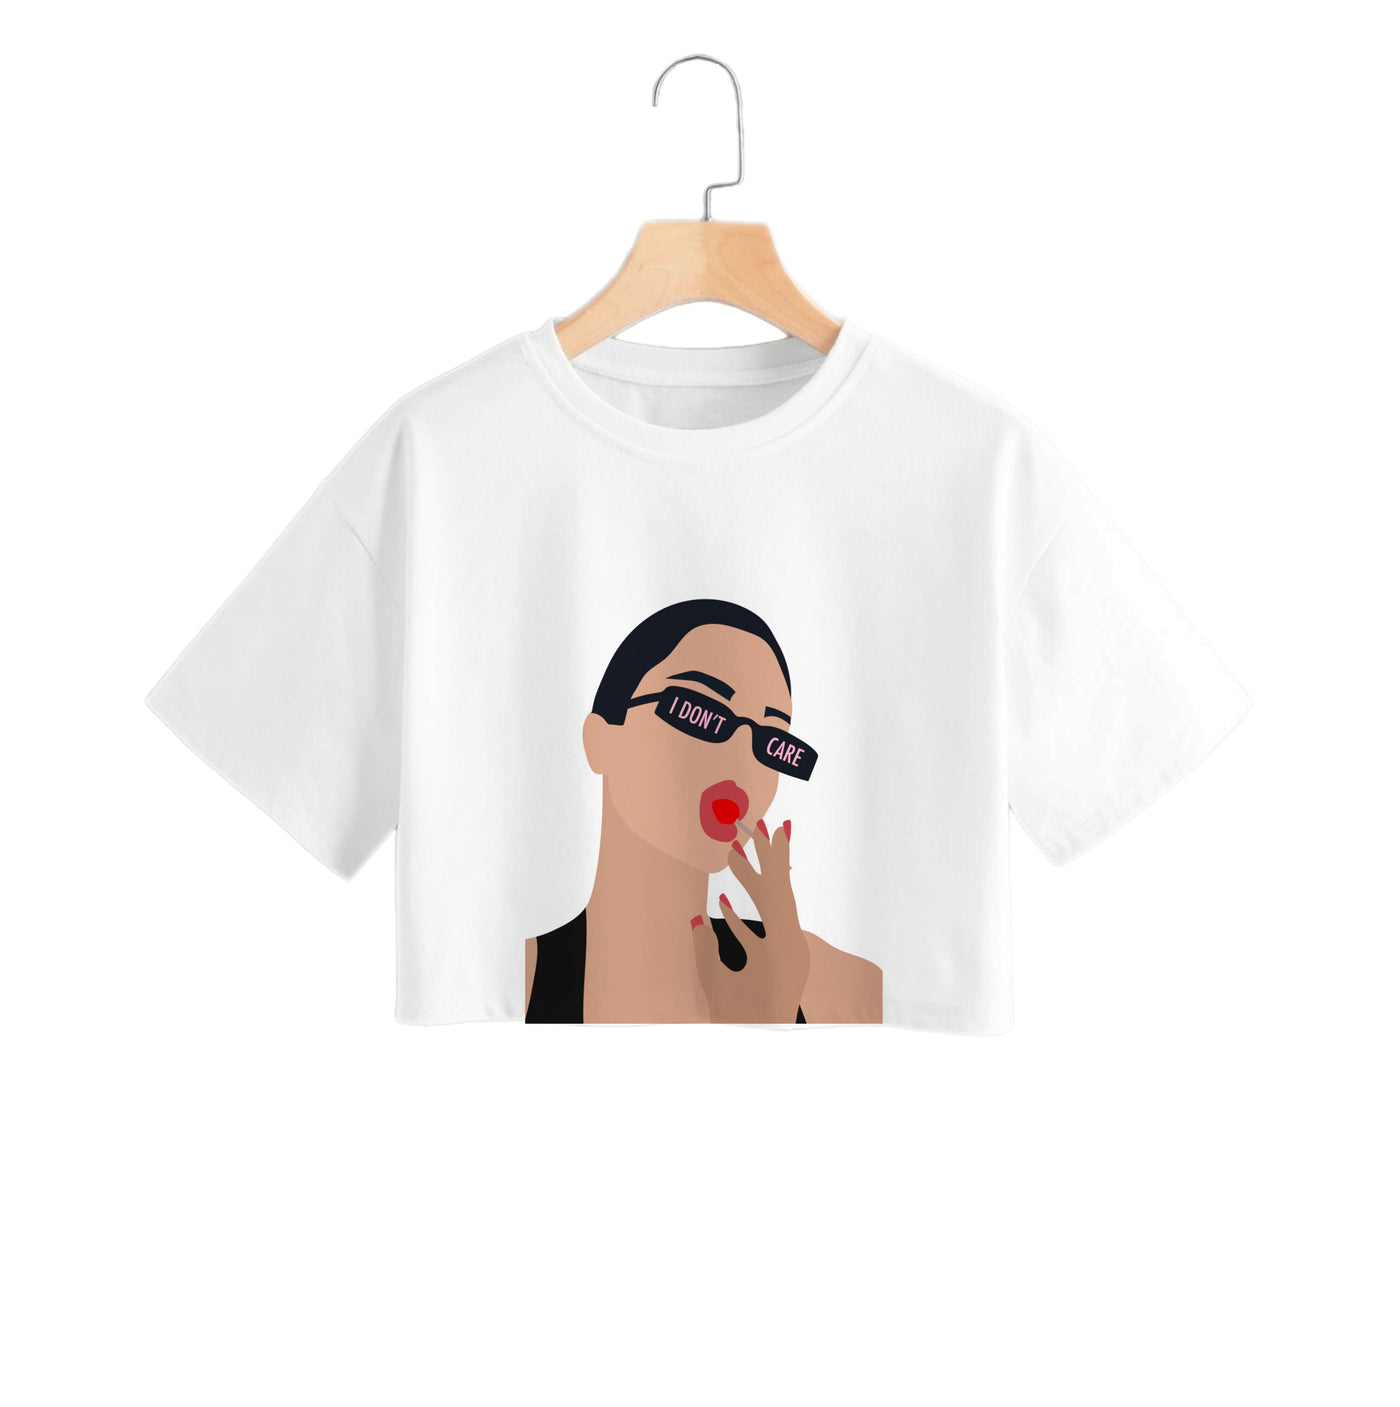 Kendall Jenner - I Don't Care Crop Top